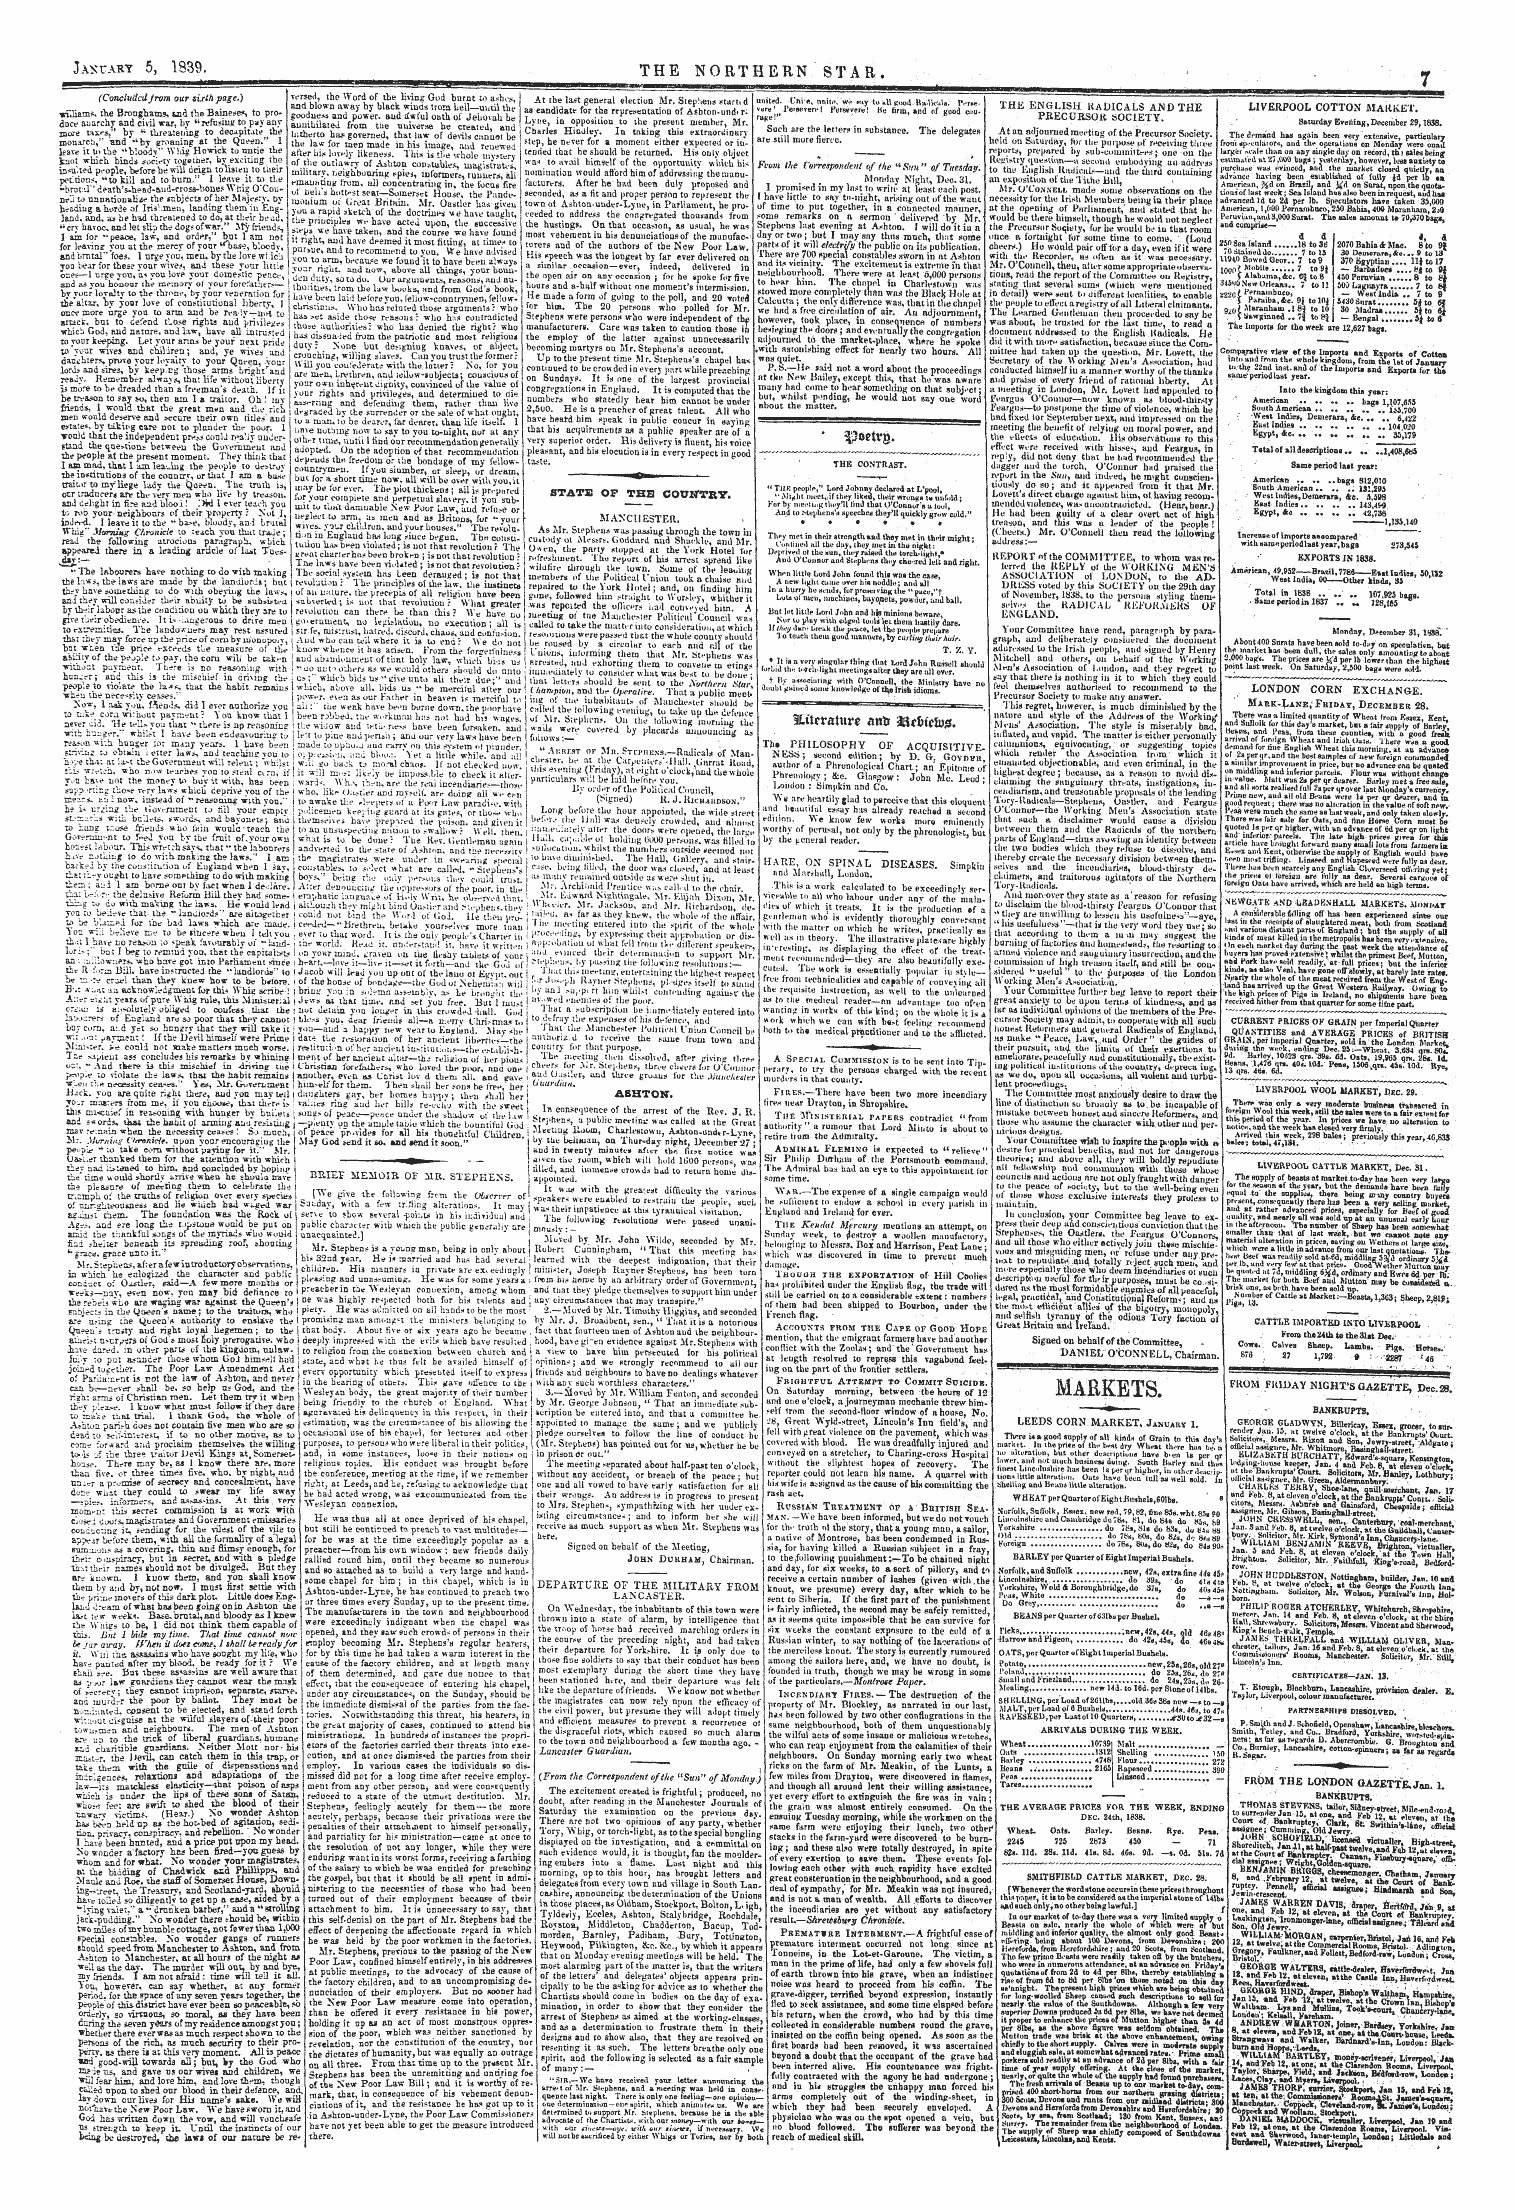 Northern Star (1837-1852): jS F Y, 1st edition - From Friday Night's Gazette , Dec.28